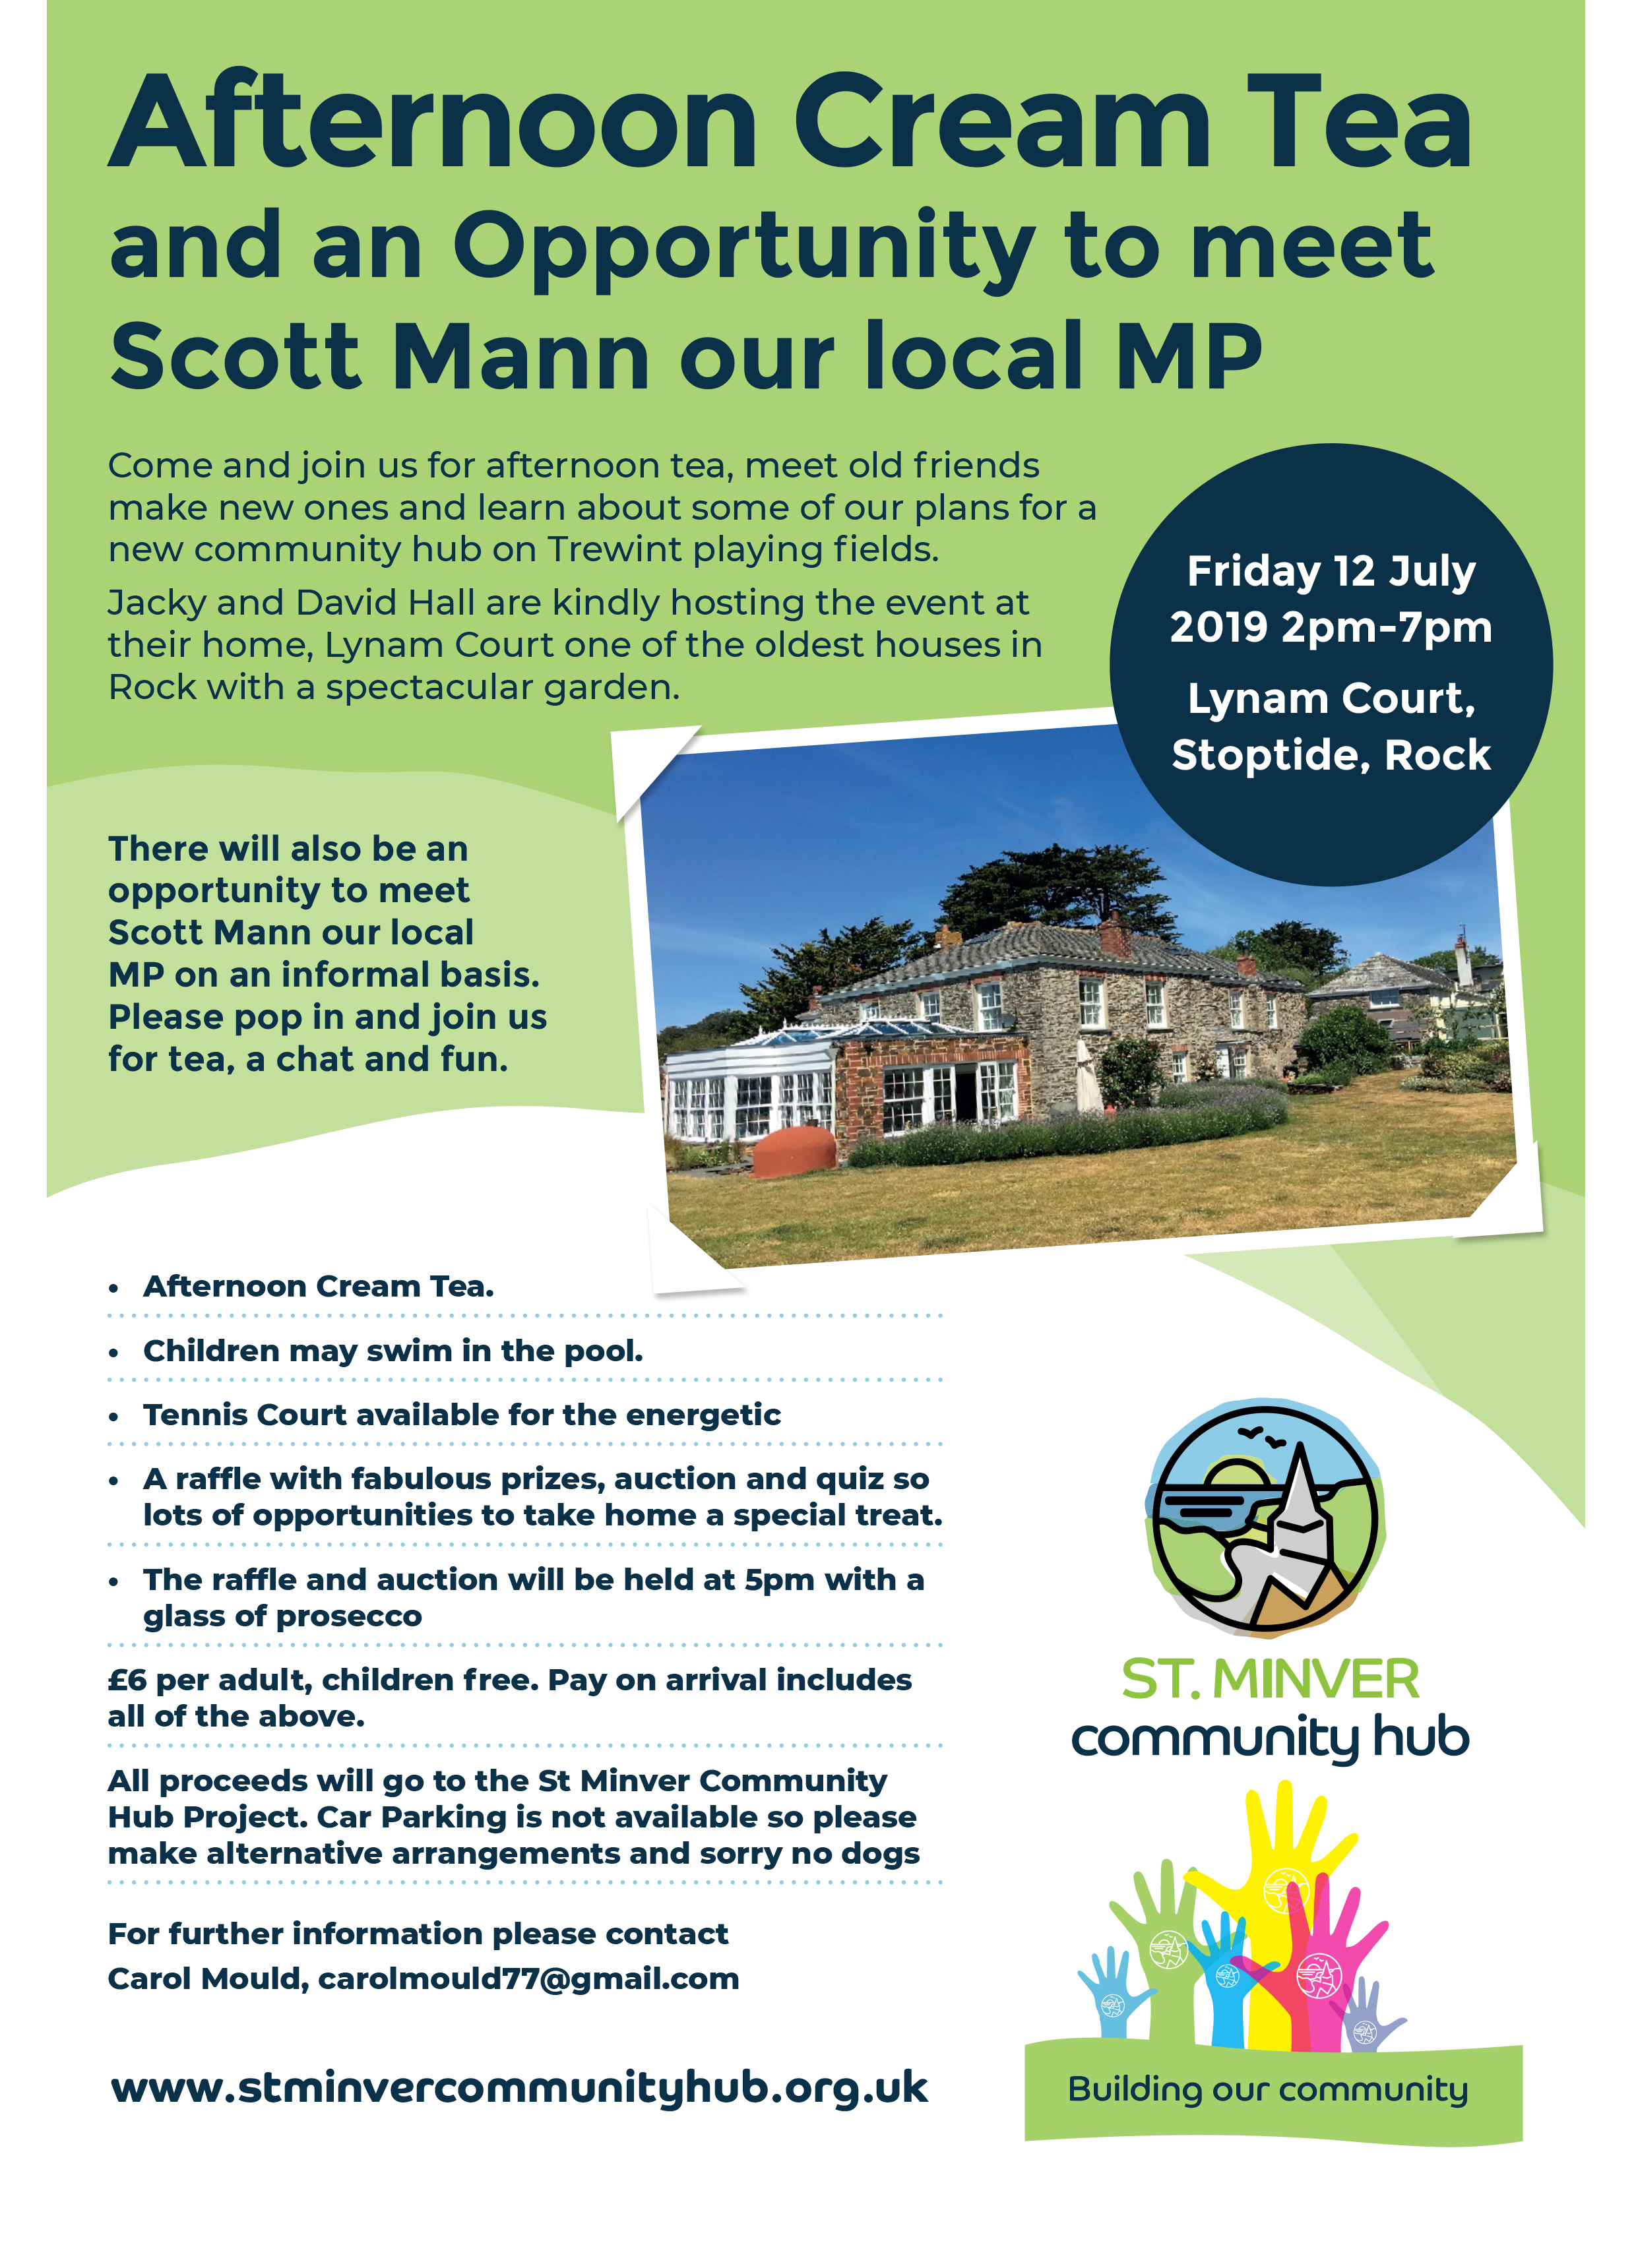 Afternoon Cream Tea and an opportunity to meet Scott Mann our local MP